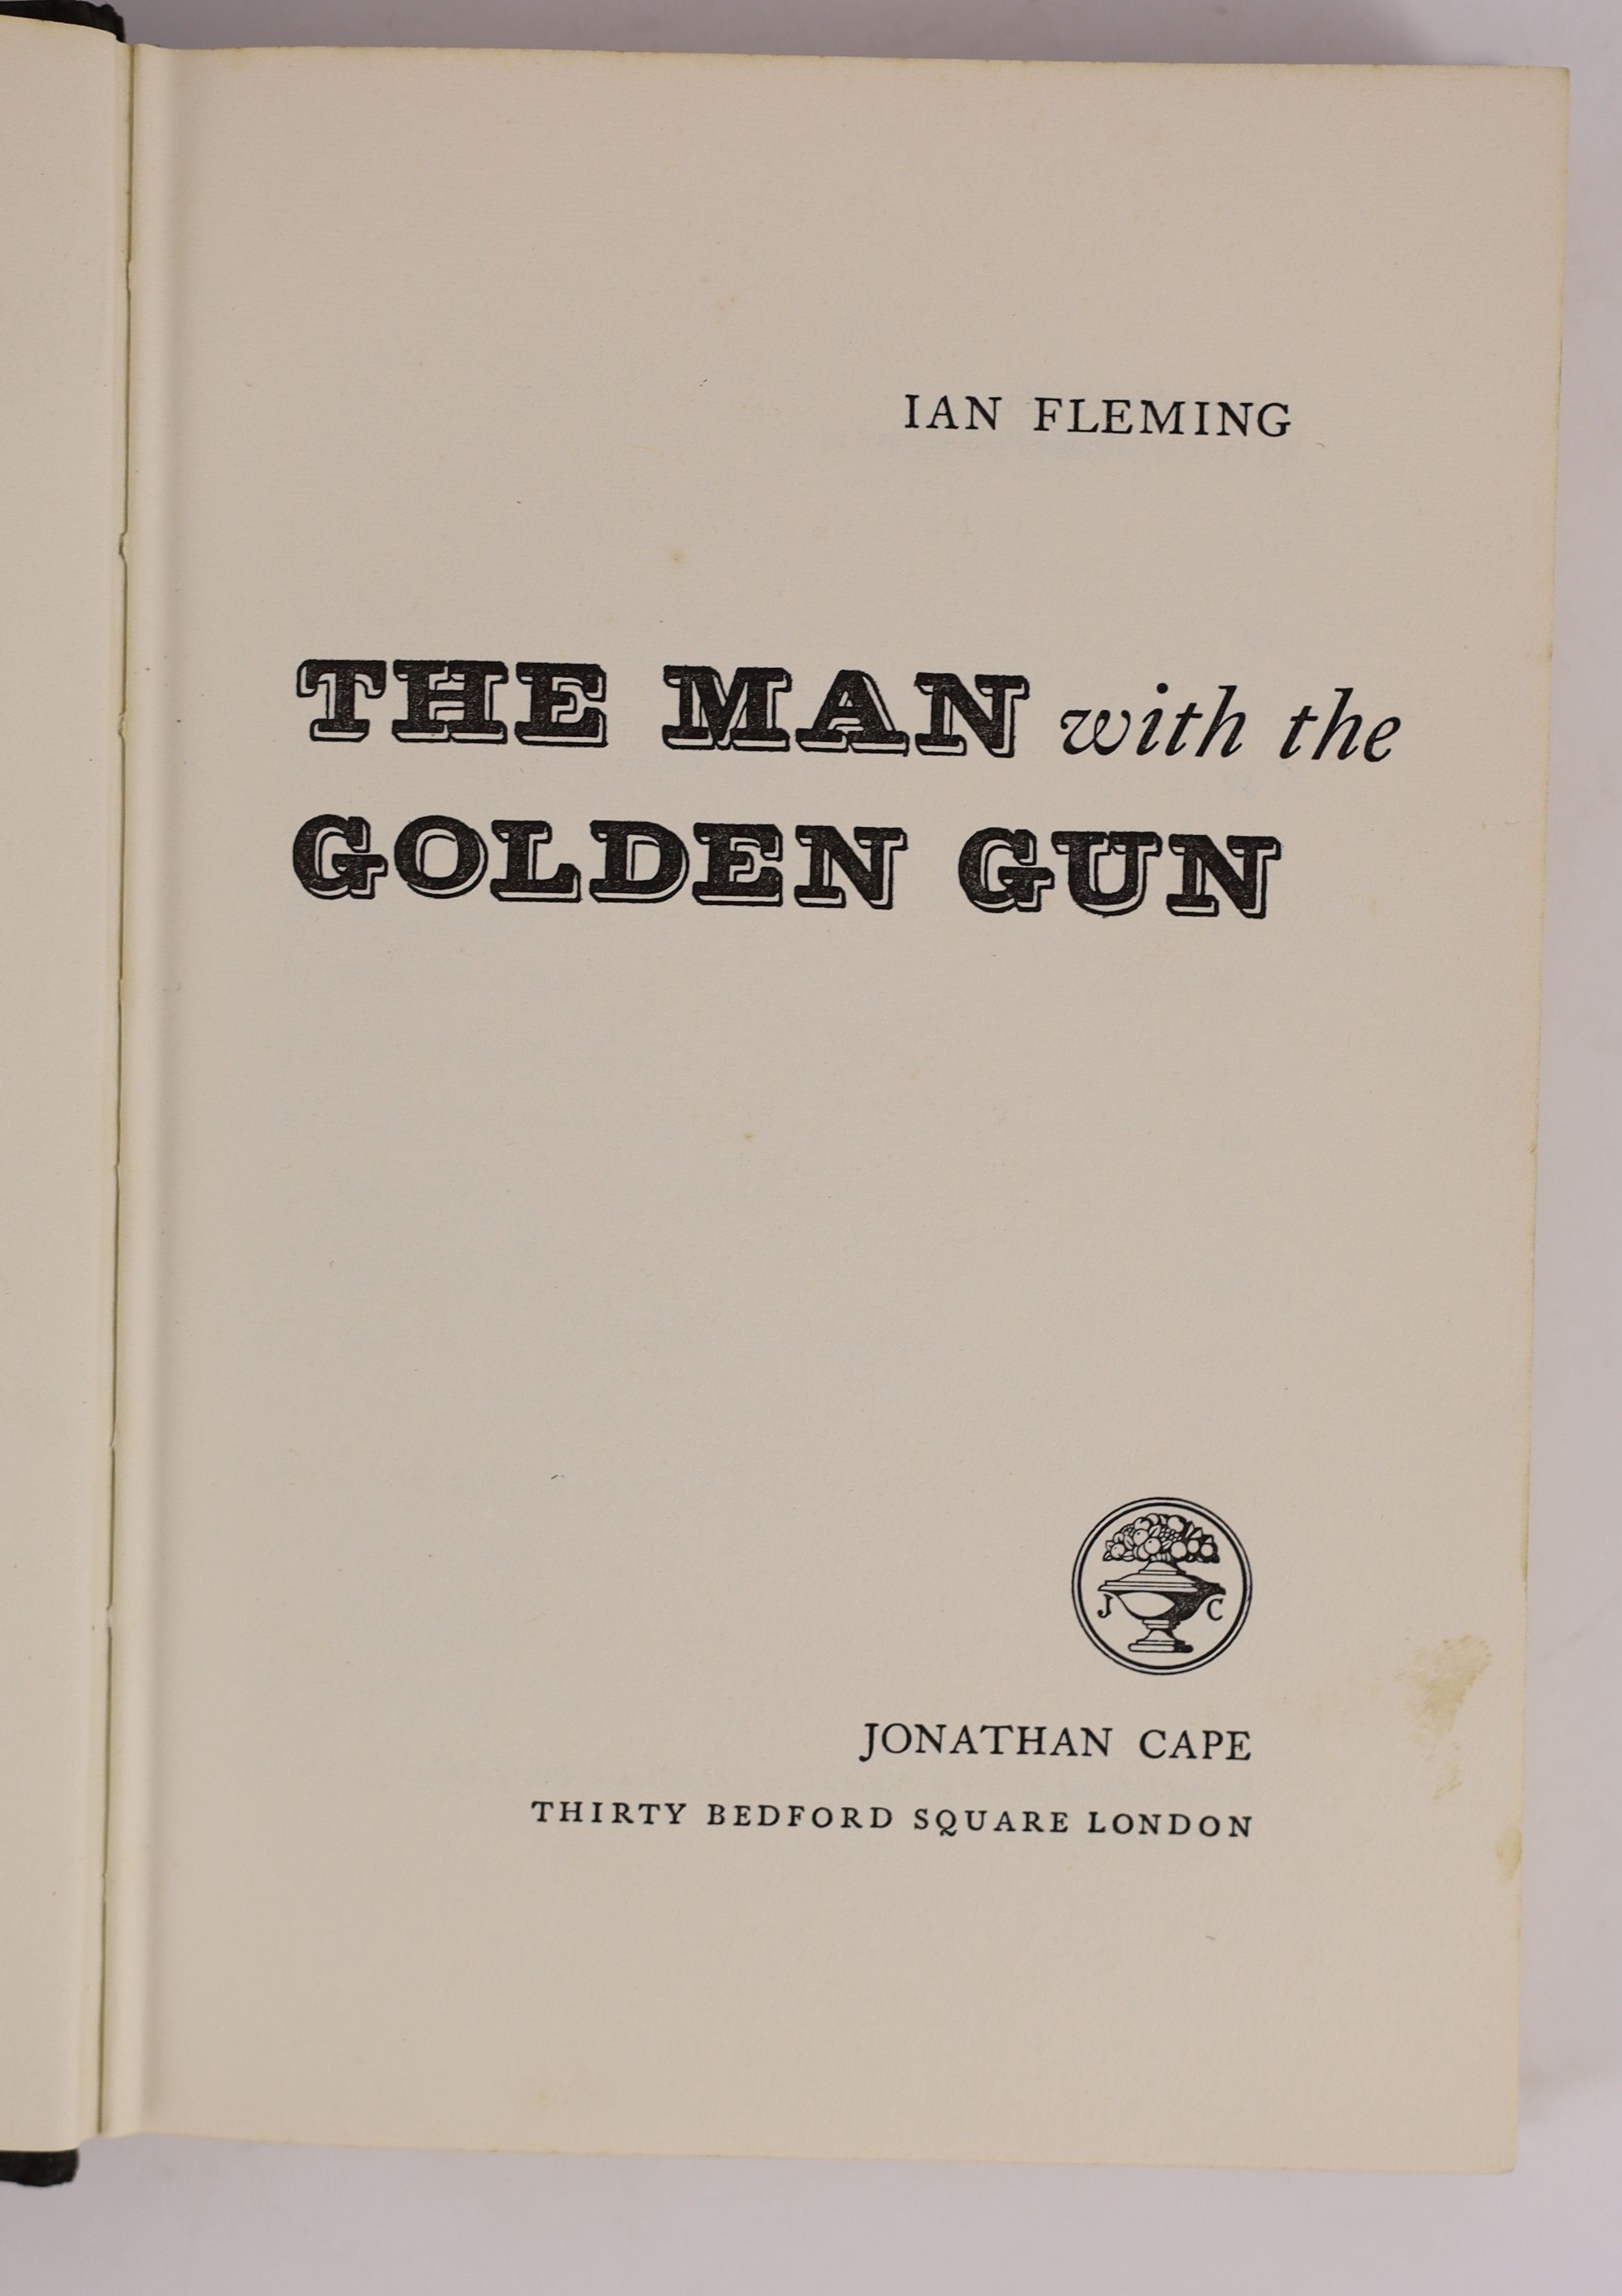 Fleming, Ian - The Man with the Golden Gun, 1st edition, cloth, with unclipped d/j, Johnathan Cape, London, 1965